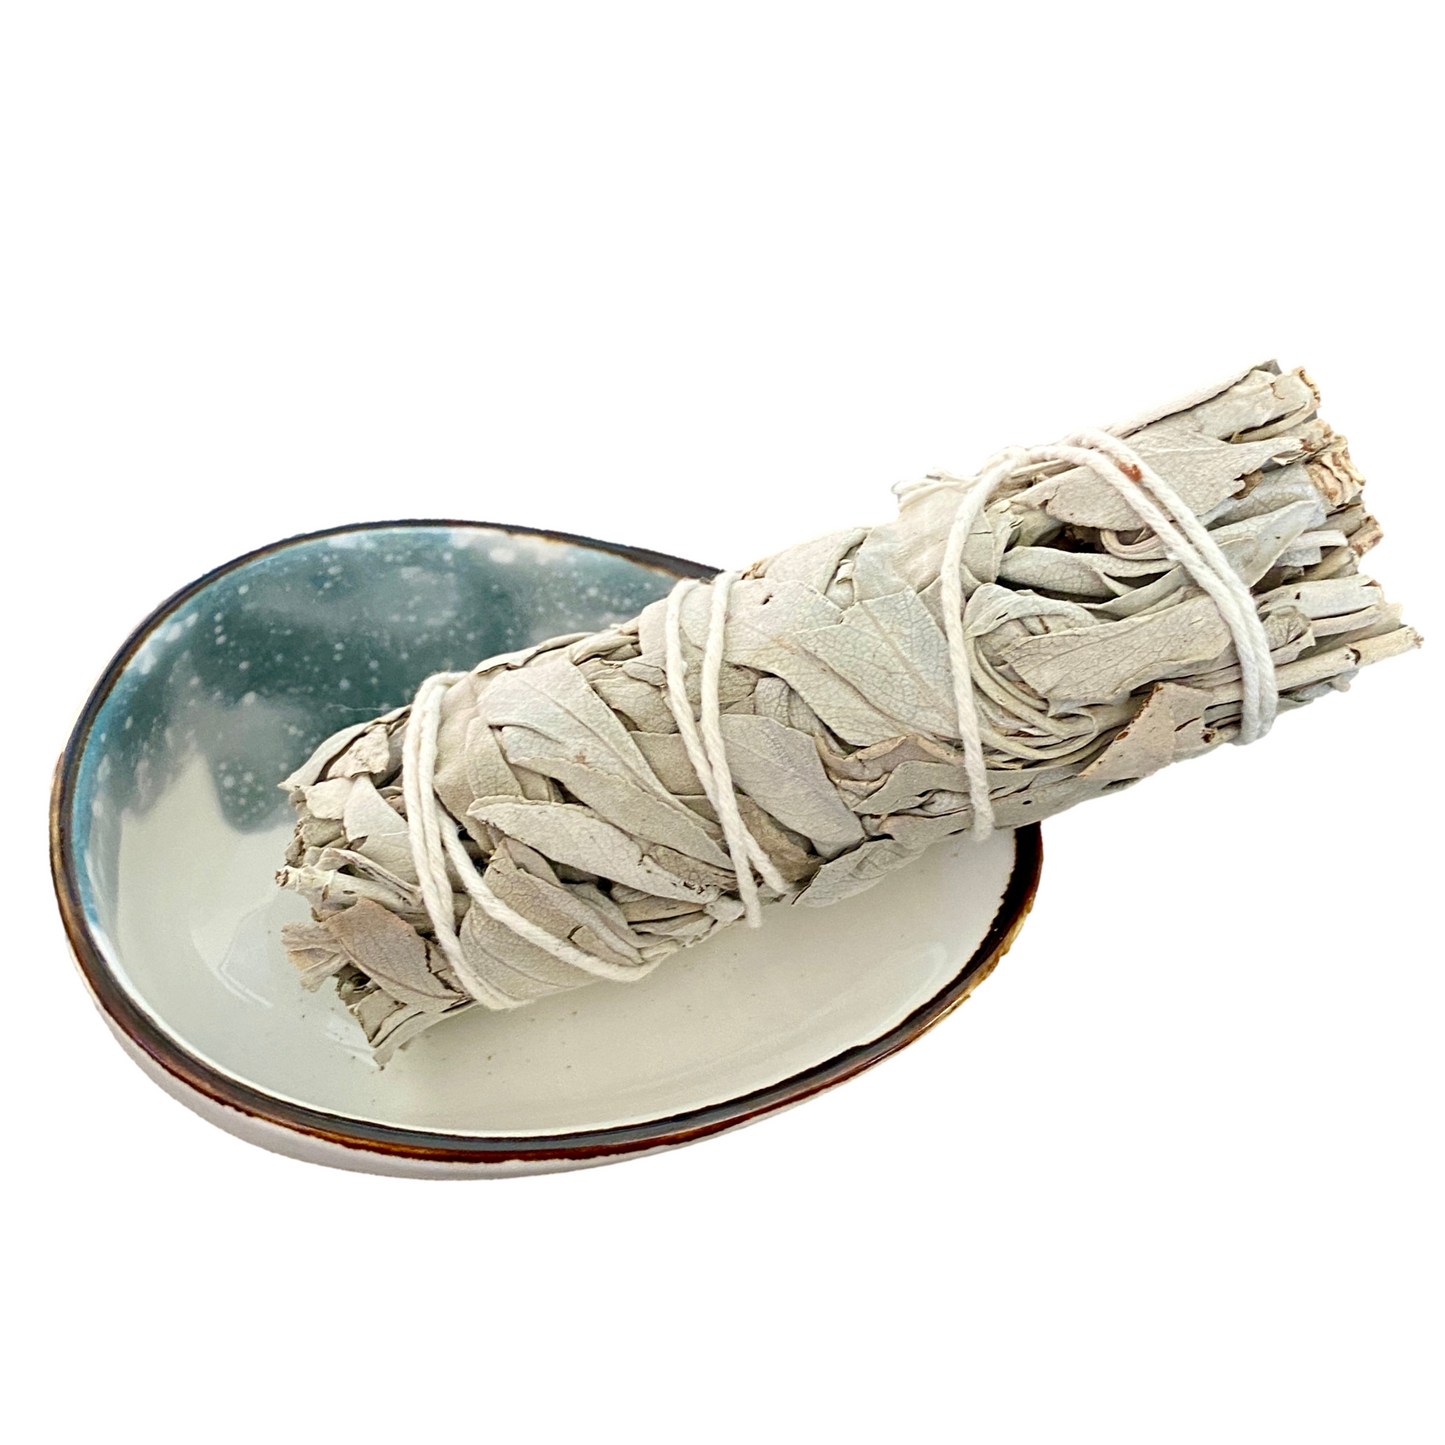 Citrine and Clear Quartz Candle with White Sage Stick and Ceramic Abalone Dish